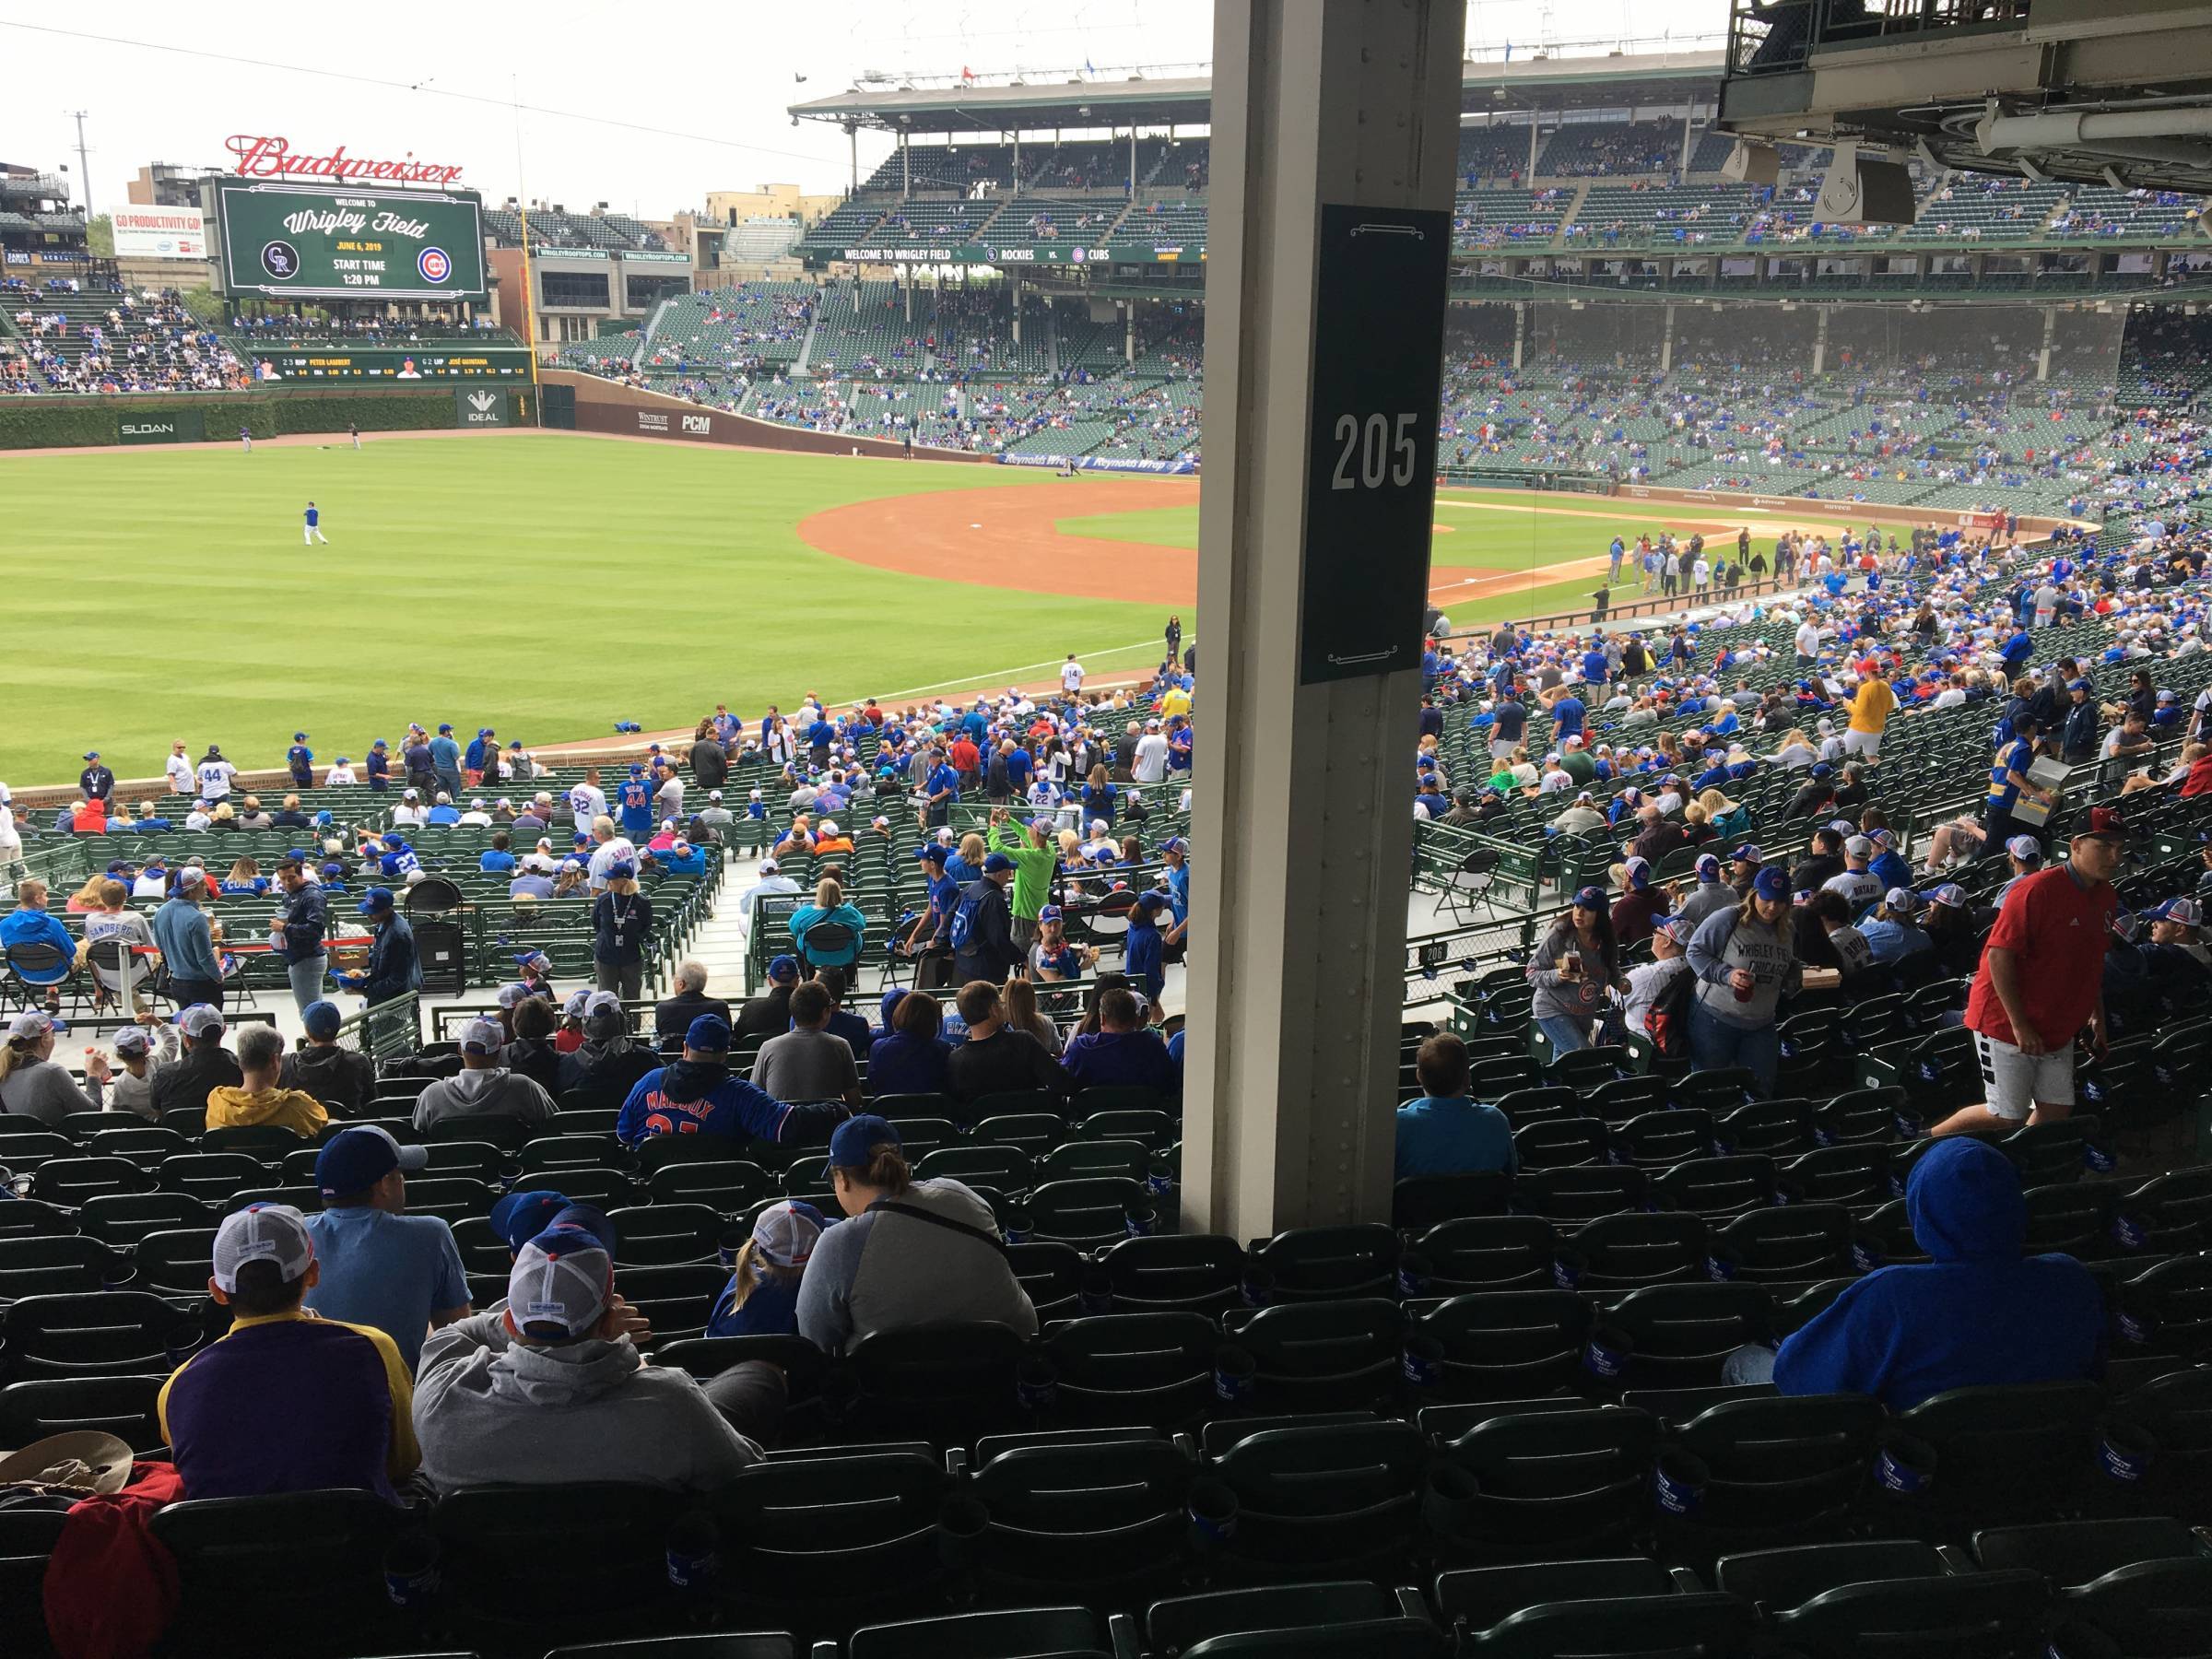 Pole in Section 205 at Wrigley Field